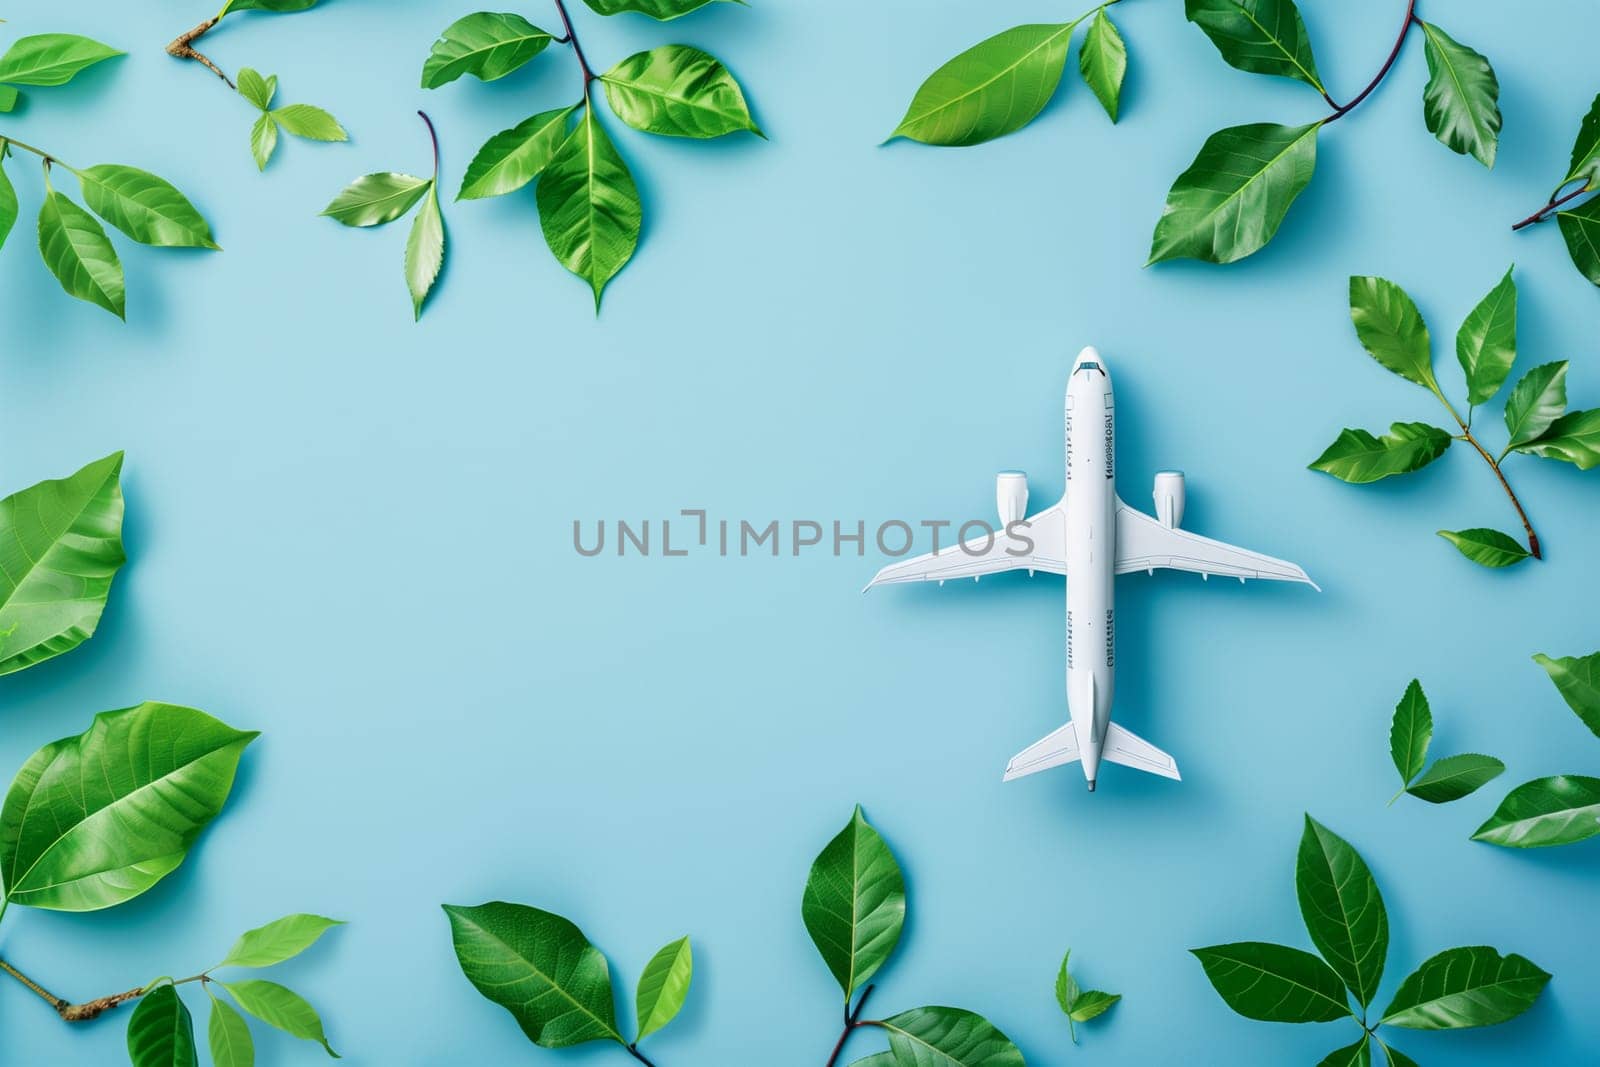 A top view of a white model airplane symbolizing eco-friendly travel, with fresh green leaves scattered around on a vibrant blue backdrop.